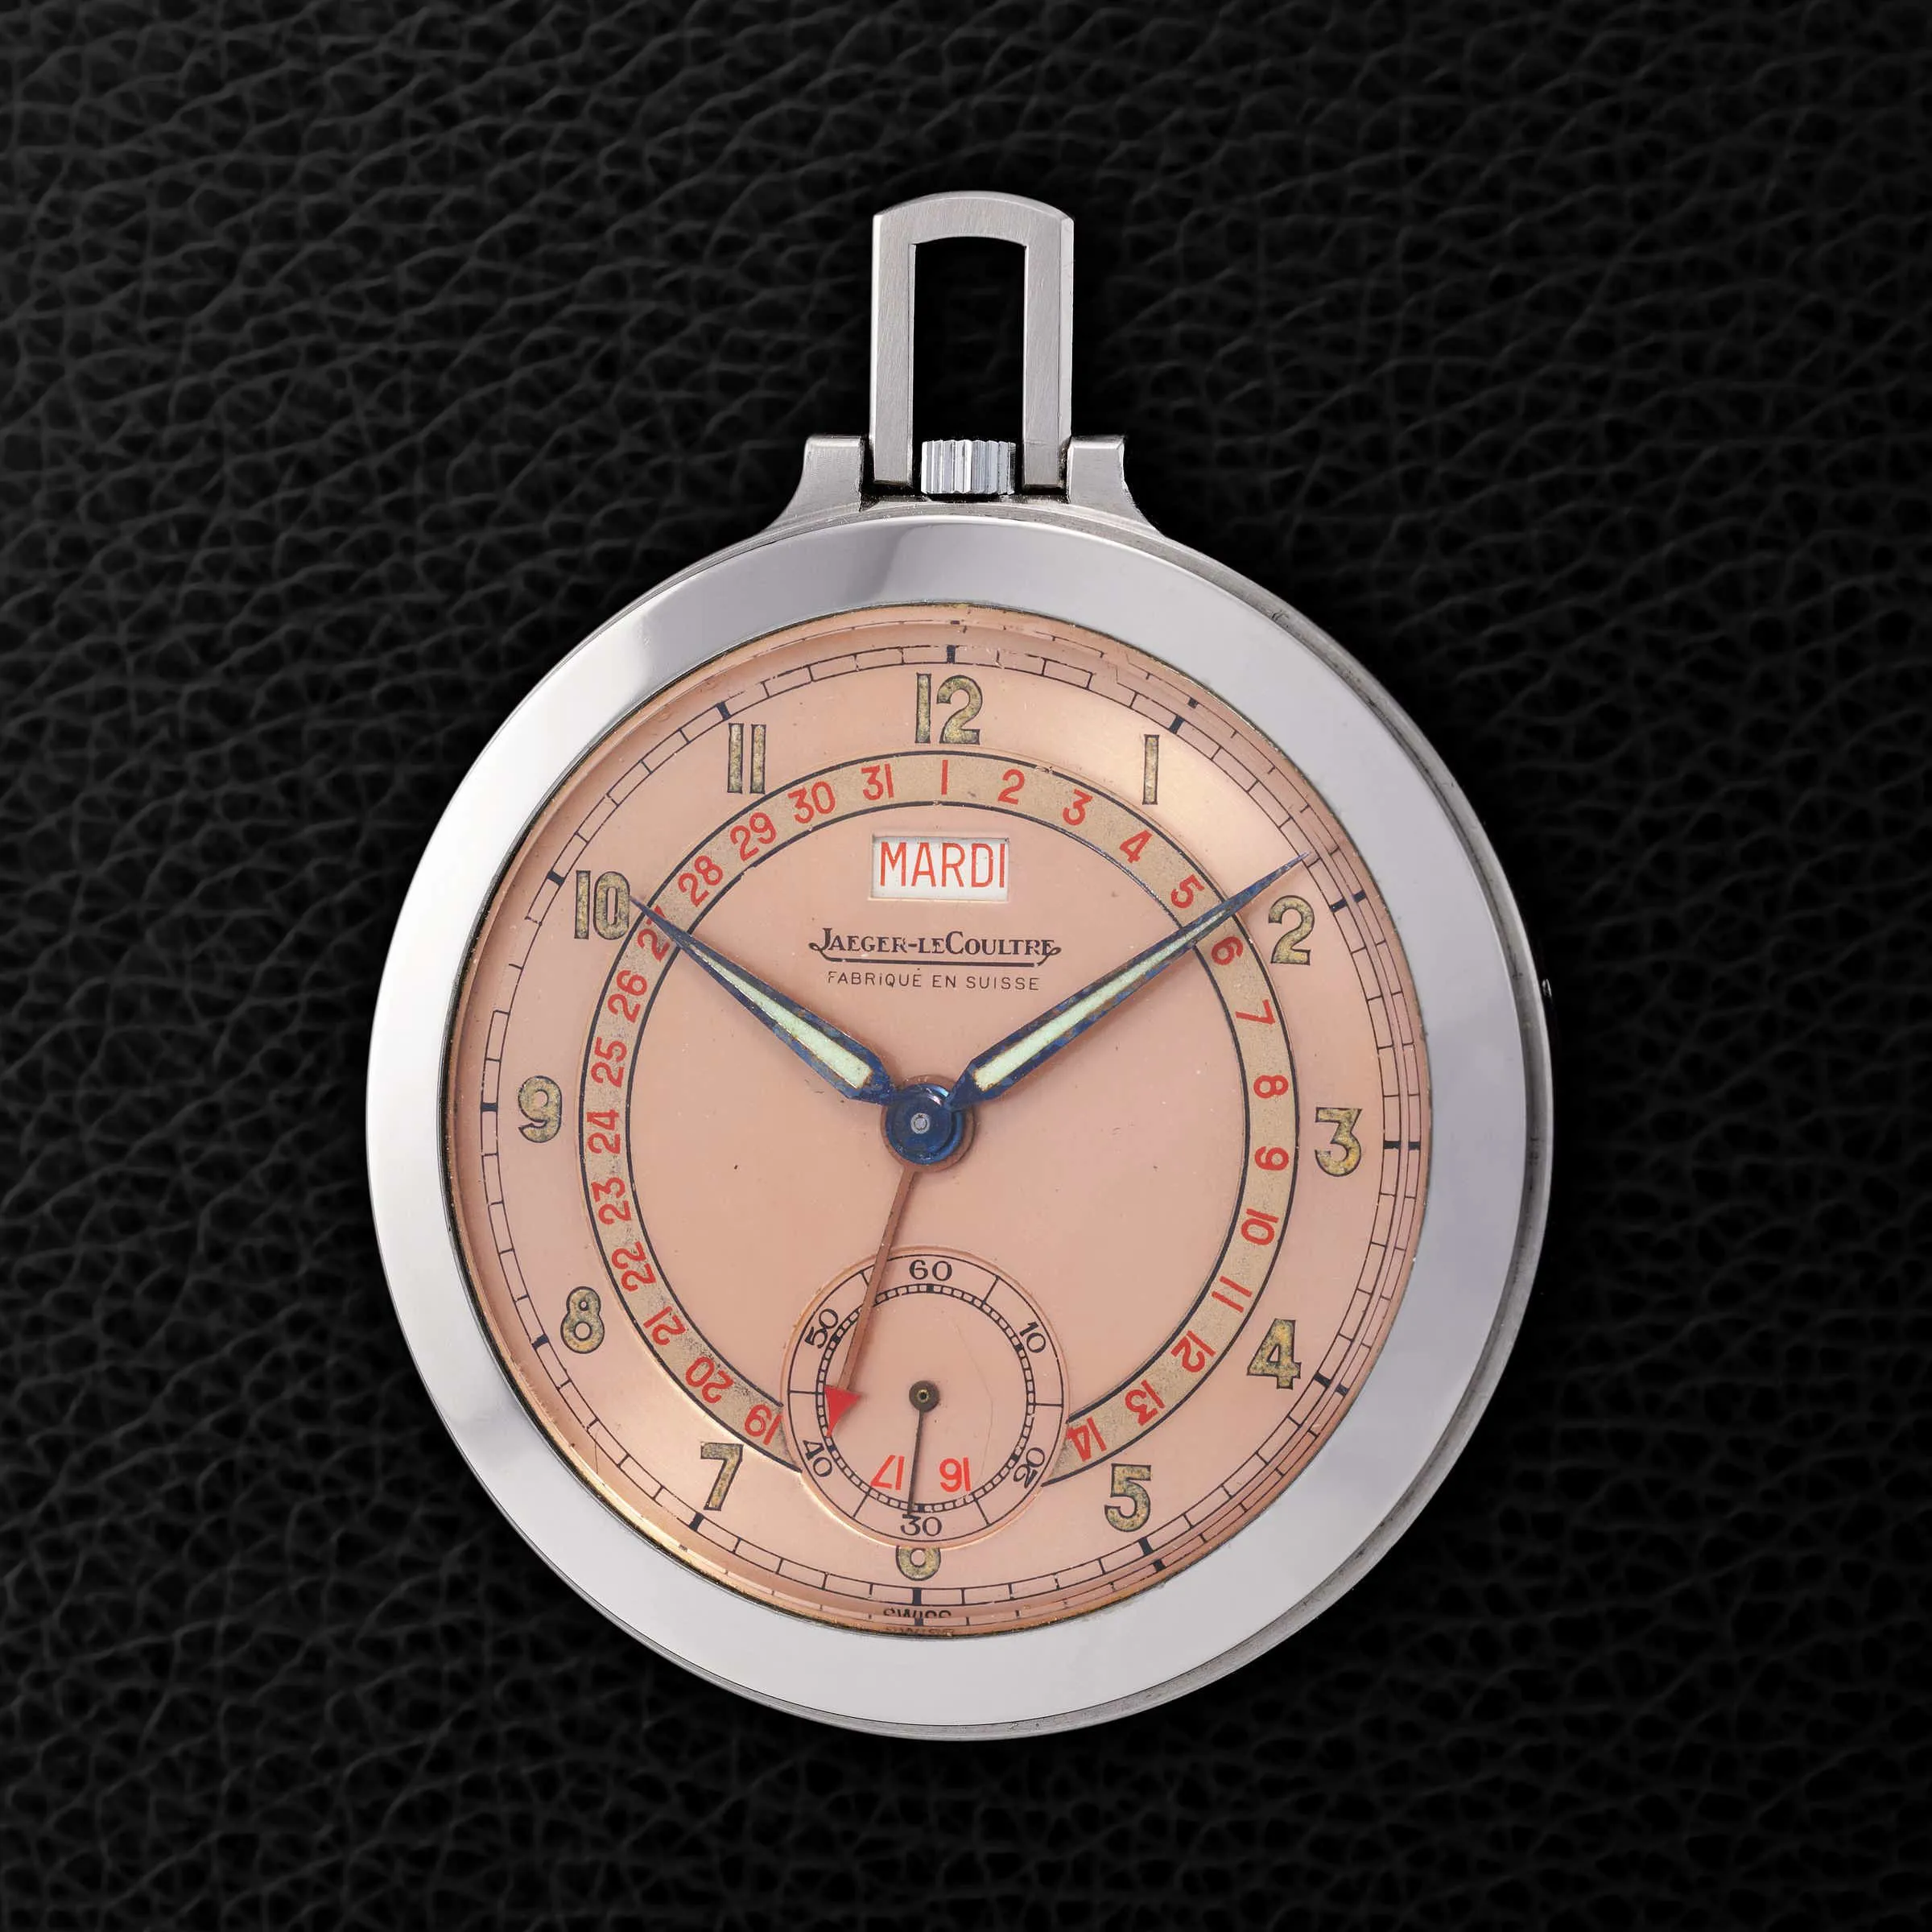 Jaeger-LeCoultre 46mm Stainless steel Salmon